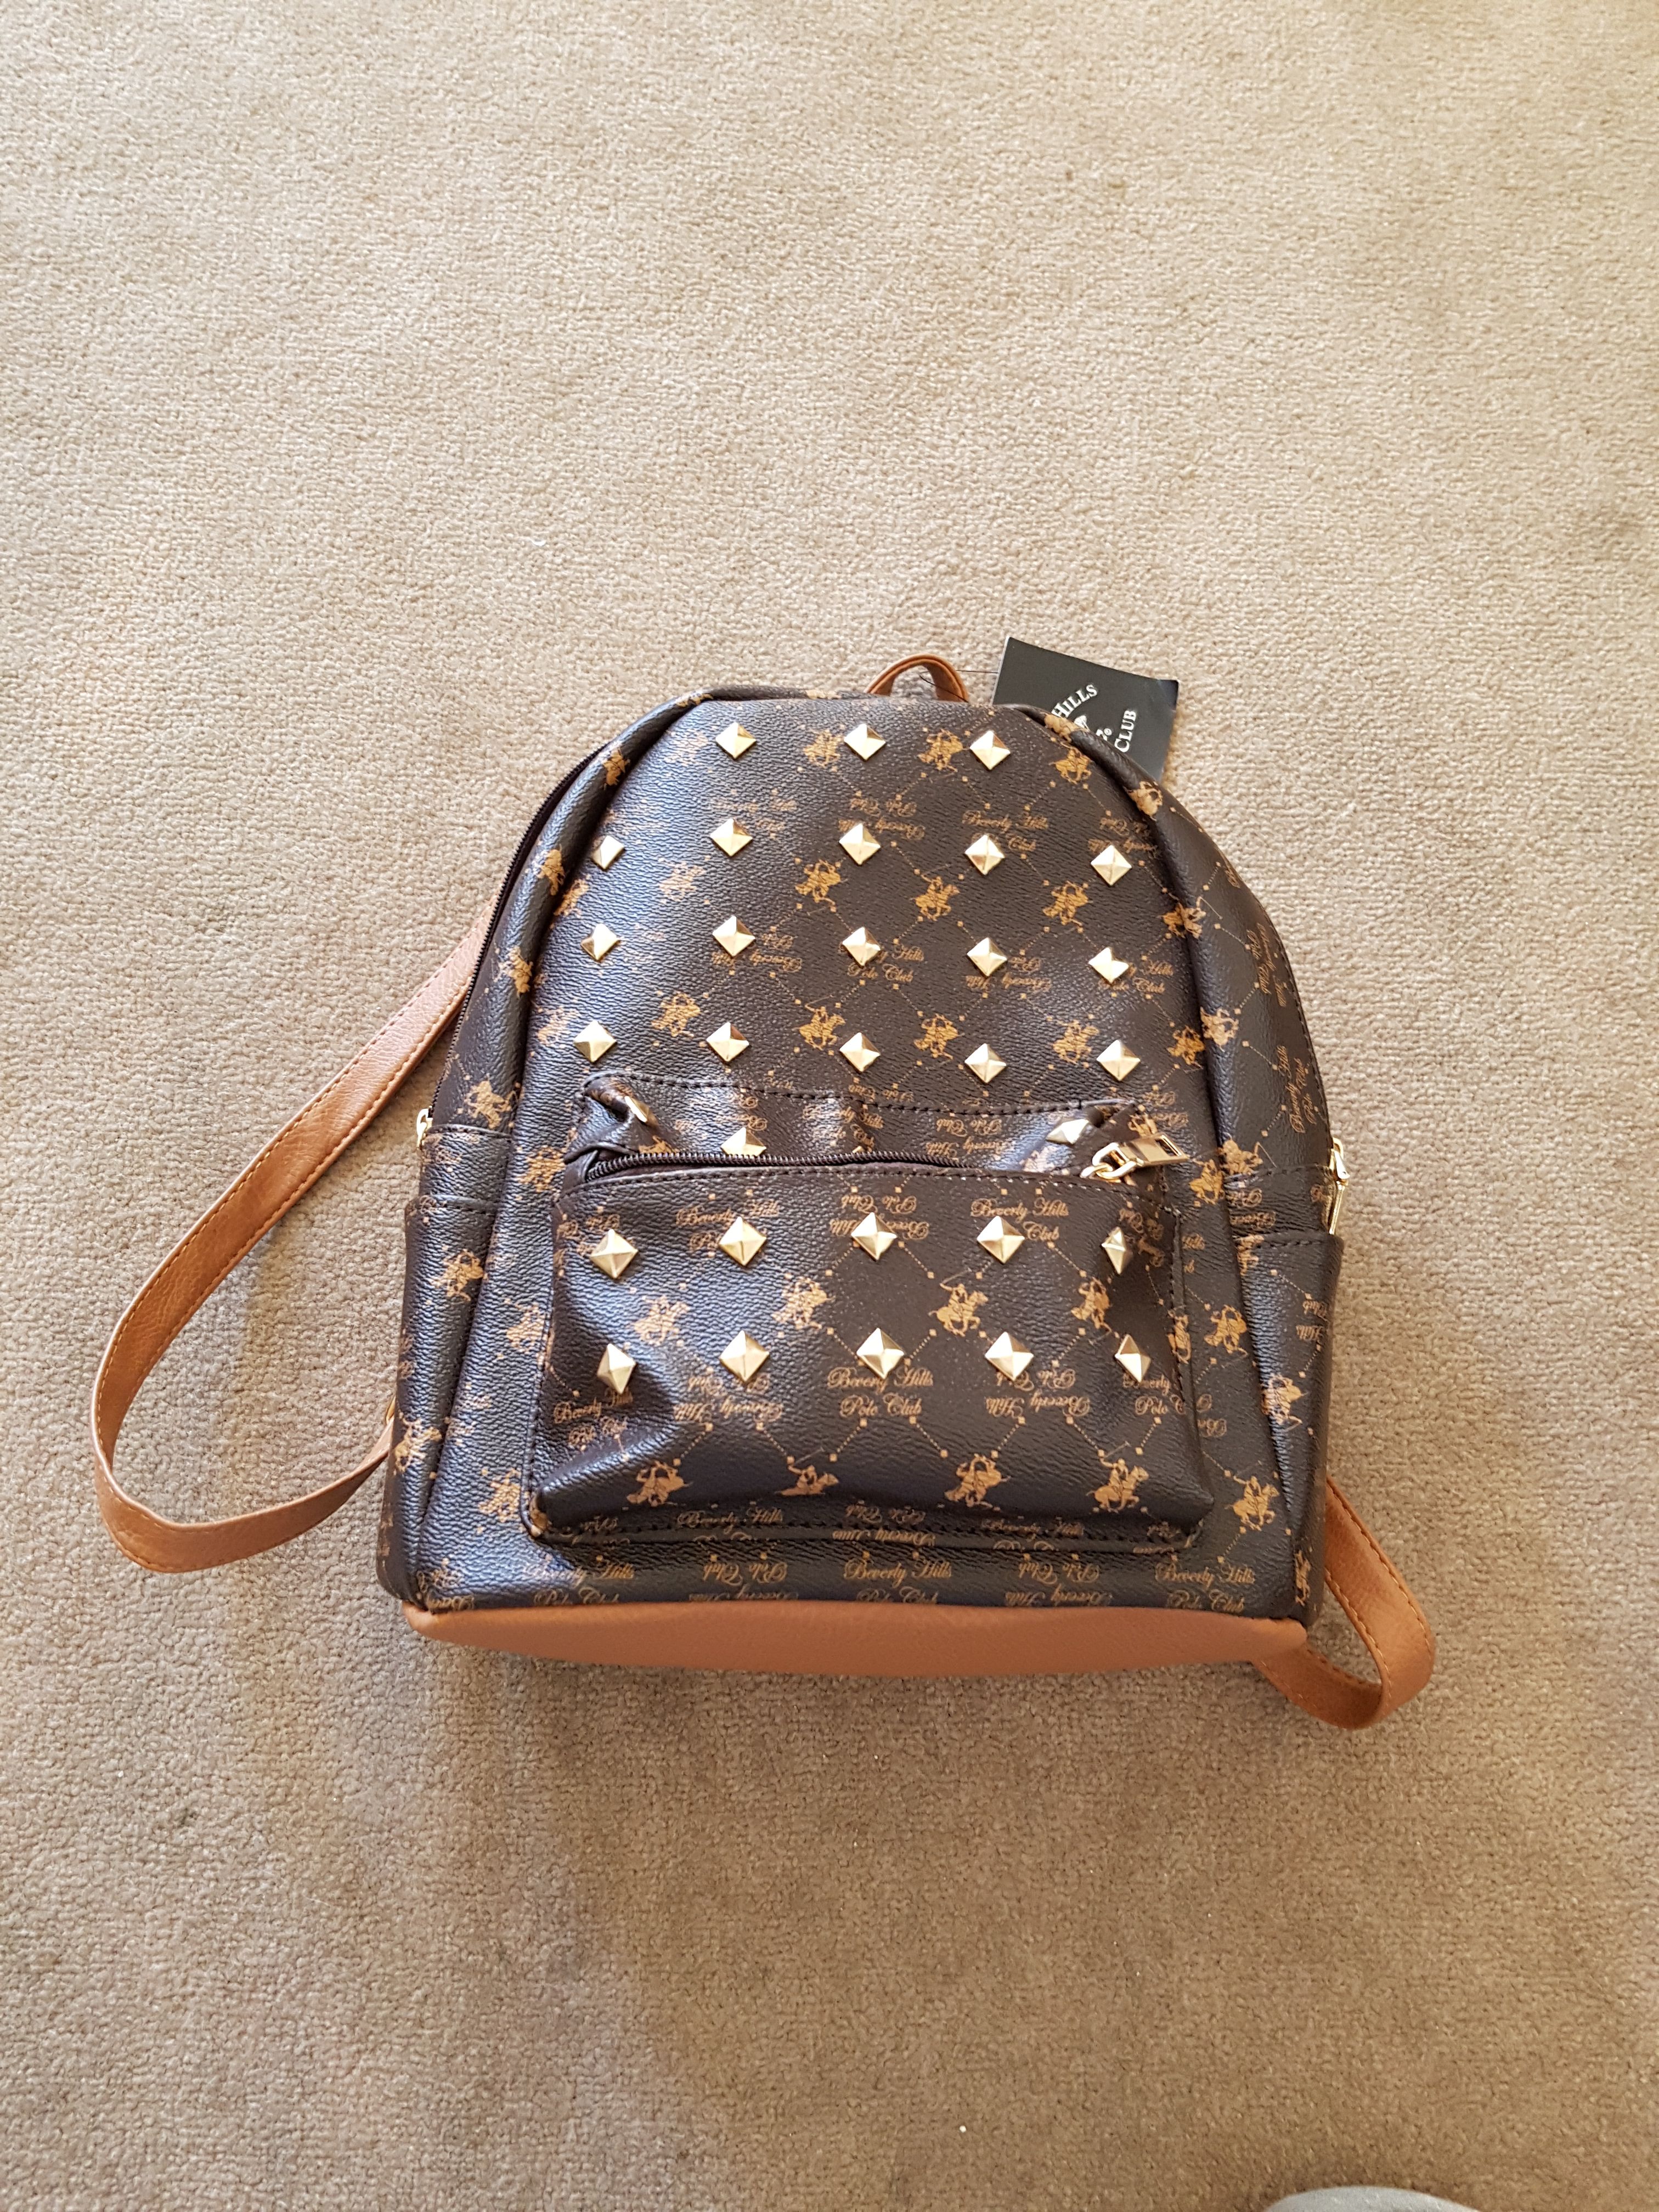 Brand New Beverly Hills Polo Club small bag backpack